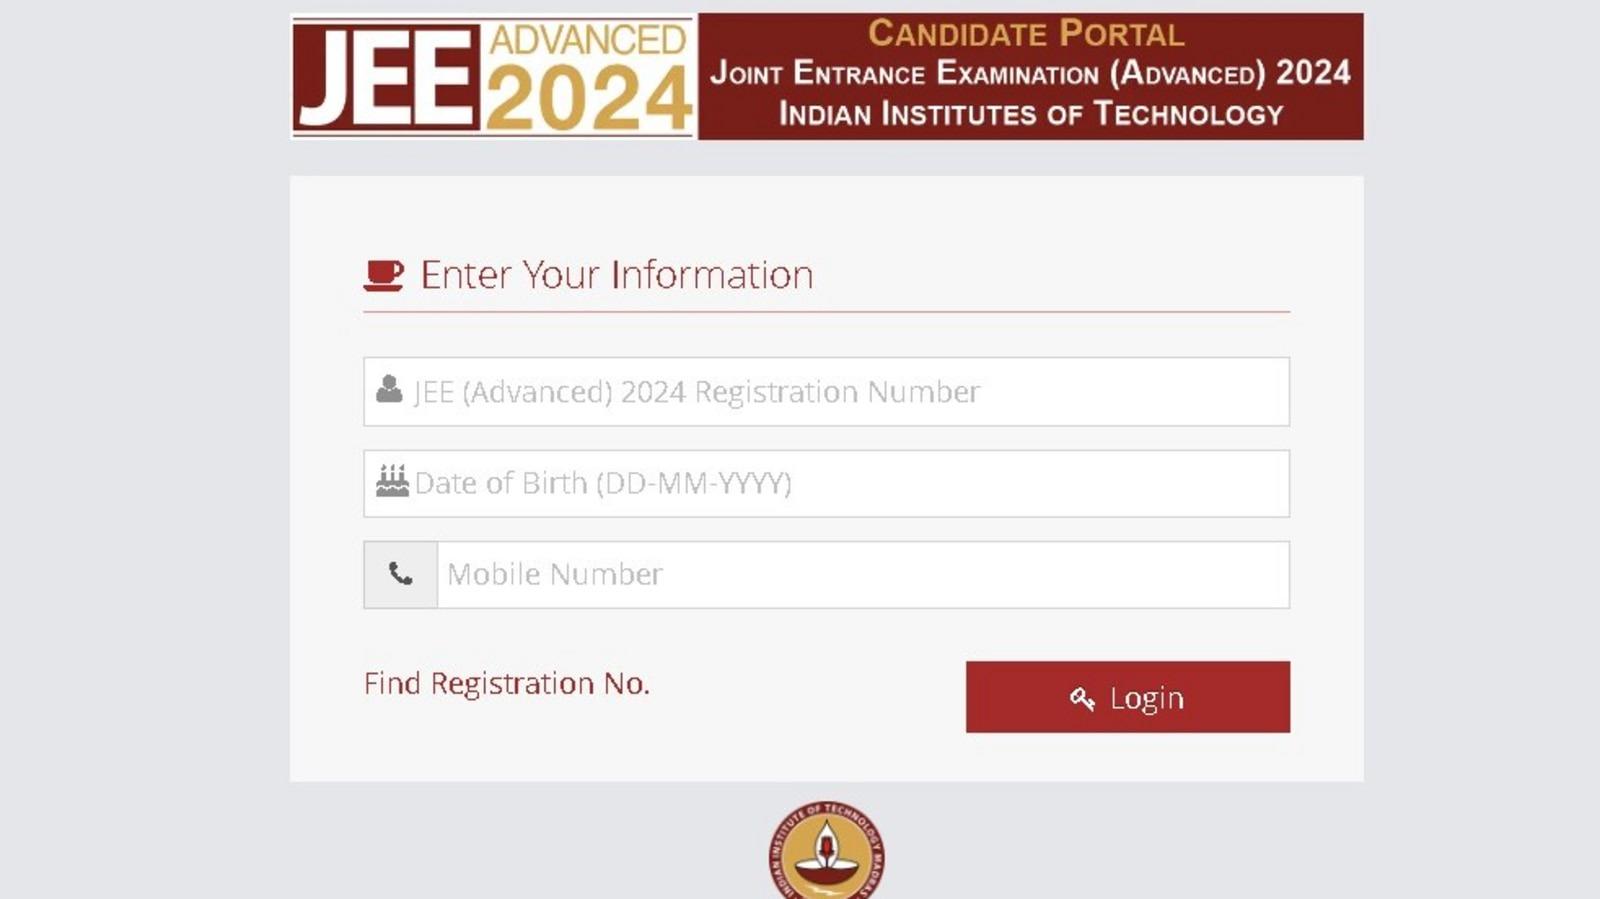 JEE Advanced 2024: Deadline Approaching to Challenge Answer Key, Here's How to Raise Objections